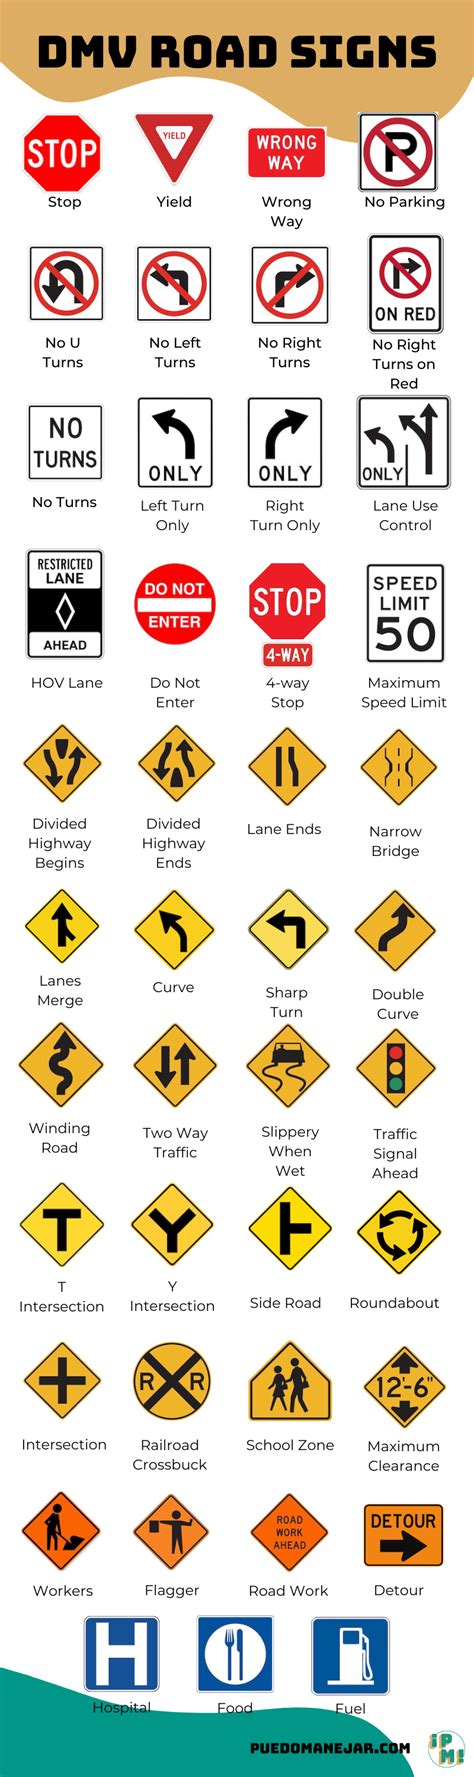 Street signs dmv test. California Permit Test Facts. Questions: 46. Correct answers to pass: 39. Passing score: 85%. Test locations: Department of Motor Vehicles (DMV) Offices. Test languages: English, Spanish, Hindi, Vietnamese. Based upon: California DMV handbook. Key questions: Traffic laws, road signs, fines & penalties, right-of-way rules, drug & alcohol ... 